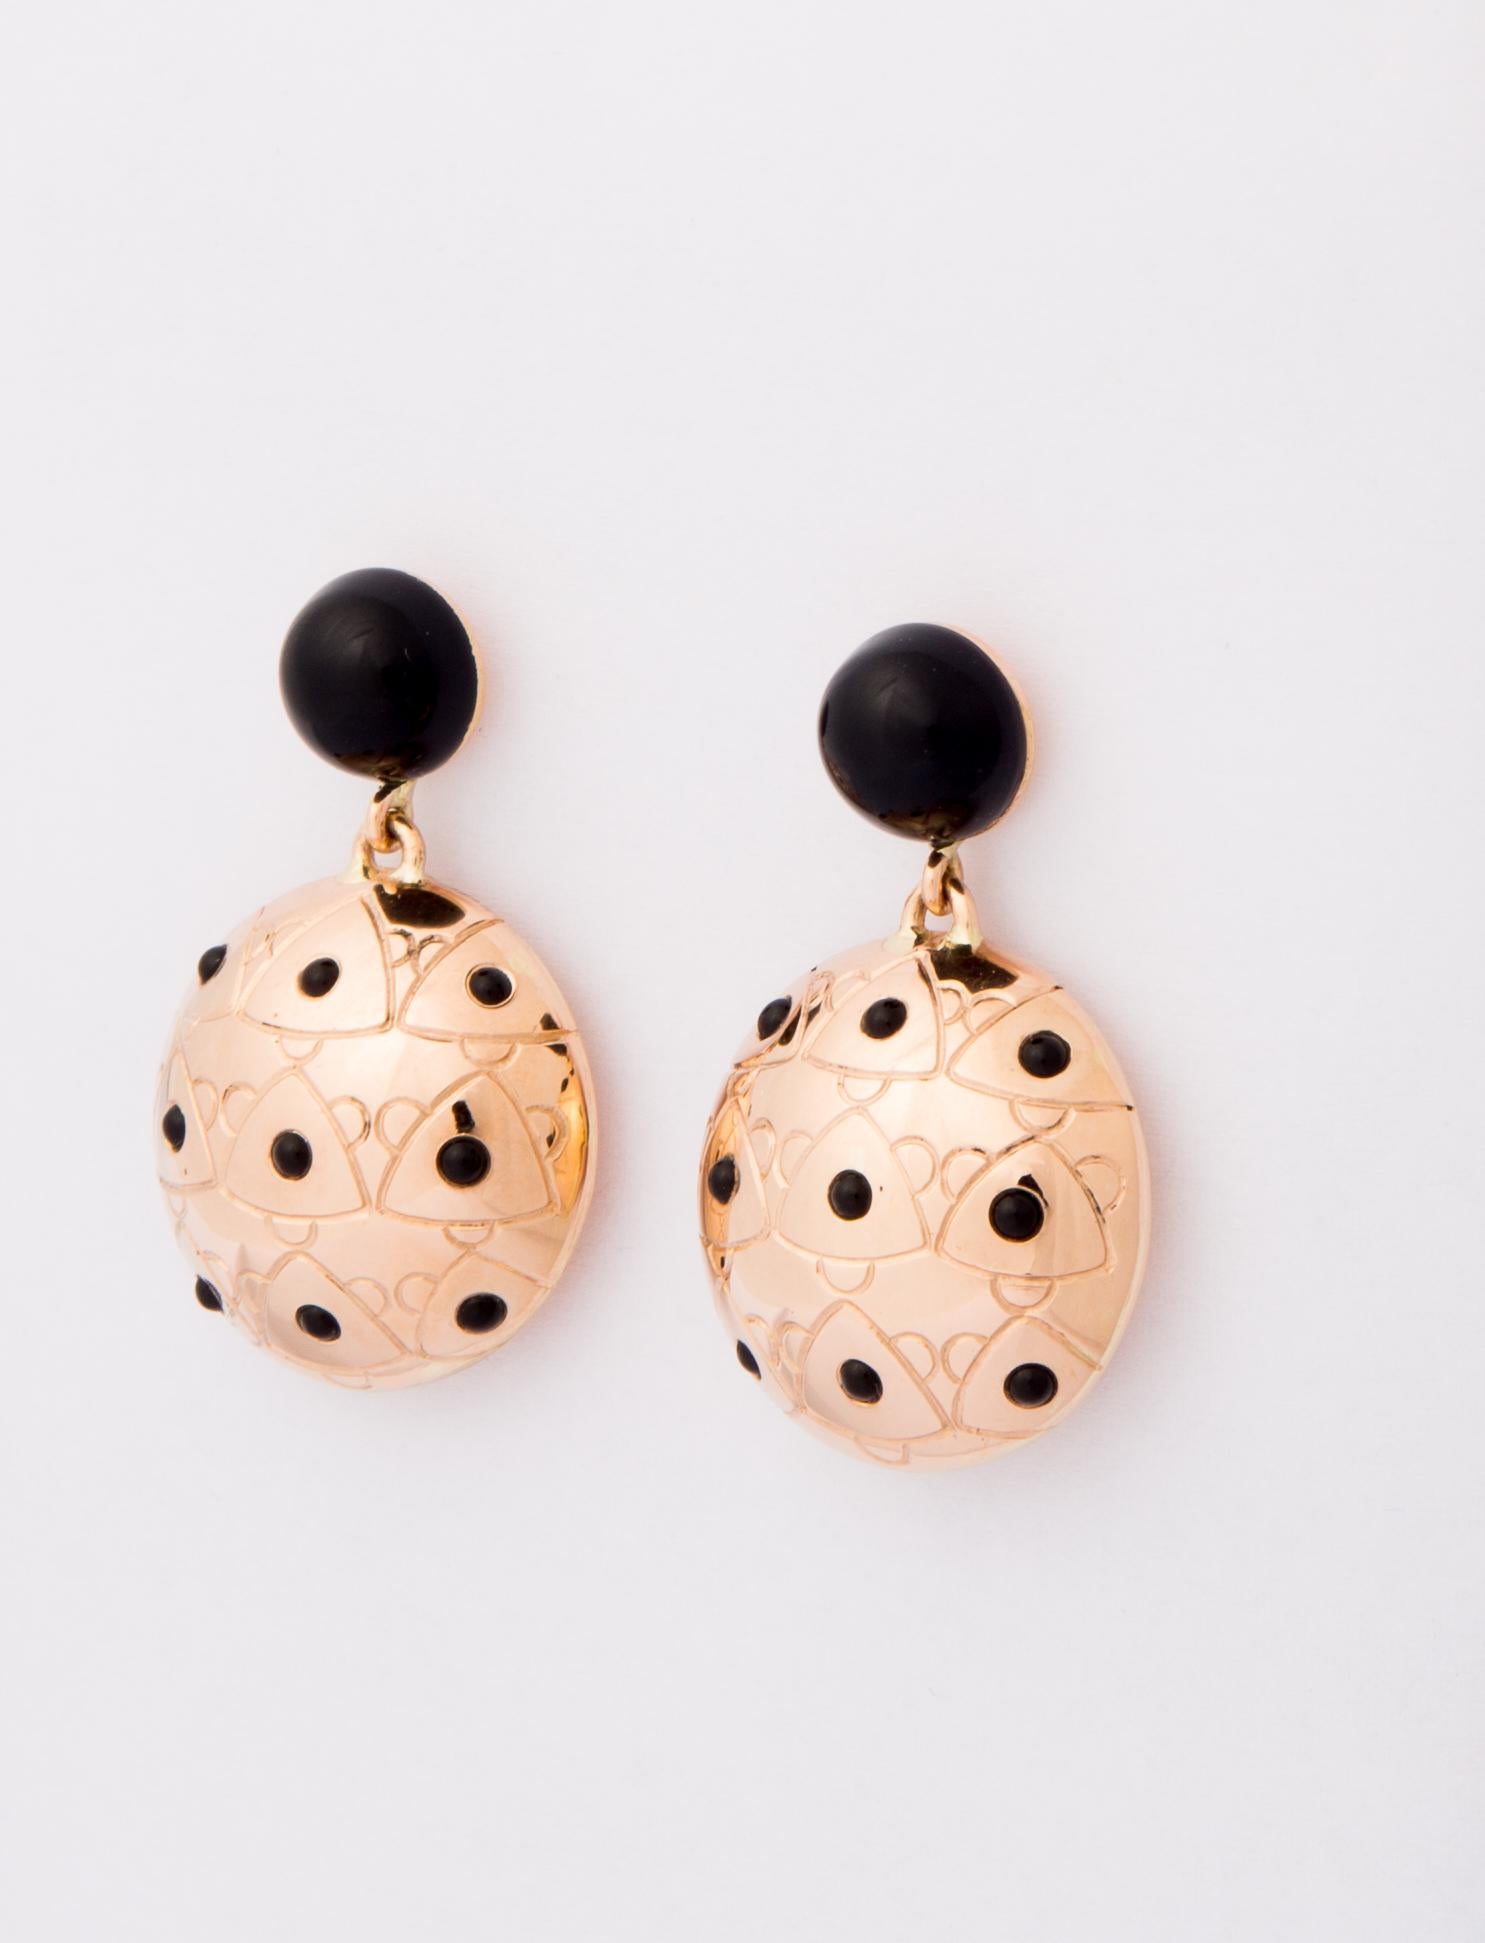 Explore the Mediterranean seabeds with these lovely pair of Sea Urchin earrings.
The creativity of their bodies are handcrafted with Yellow gold 18K and Onyx. Excellent design around your ears to give a touch of originality and glamour.
Comes with